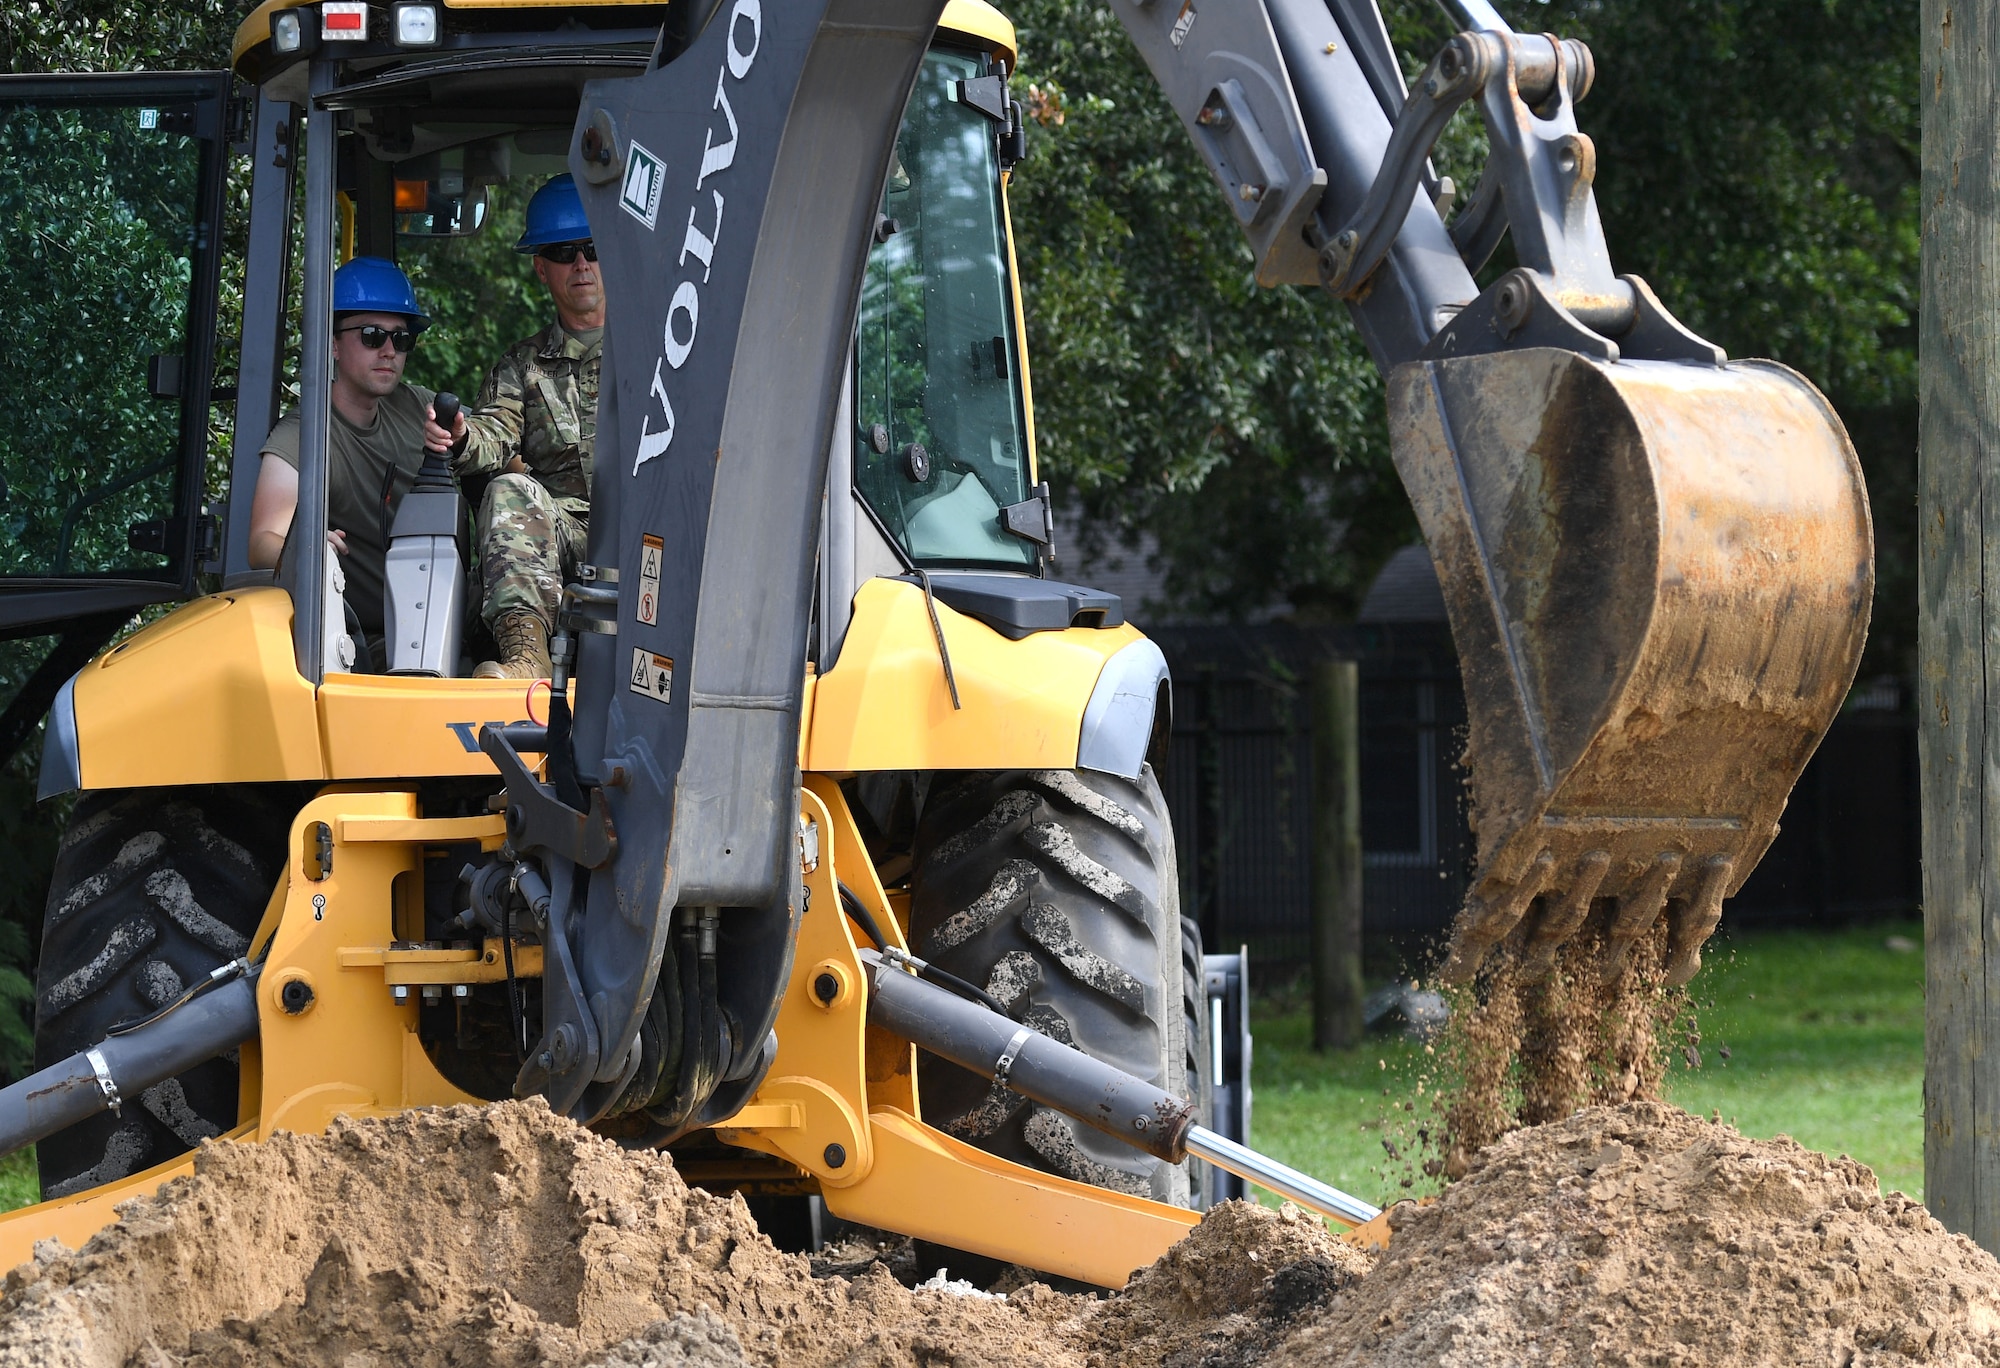 U.S. Air Force Col. William Hunter, 81st Training Wing commander, operates a backhoe with the assistance of Staff Sgt. Chase Kiefer, 85th Engineering Installation Squadron cable and antenna systems technician, during an 85th EIS immersion tour behind Maltby Hall at Keesler Air Force Base, Mississippi, Sept. 1, 2021. The purpose of the tour was to become more familiar with the squadron's mission and its capabilities. (U.S. Air Force photo by Kemberly Groue)